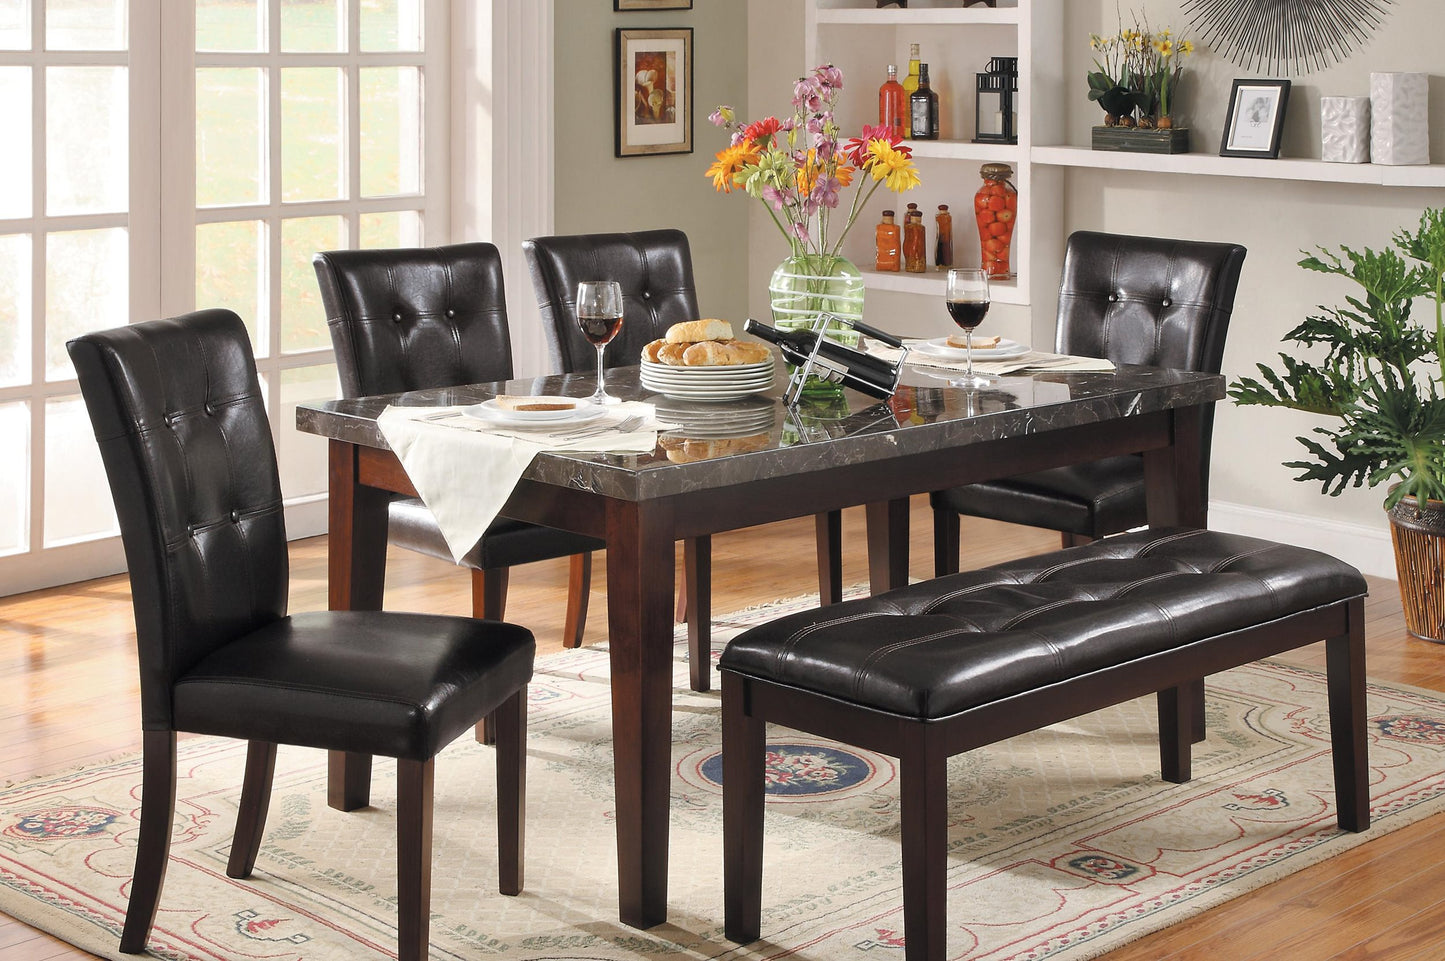 Homelegance Decatur 2 Dining Chair in Espresso Leatherette